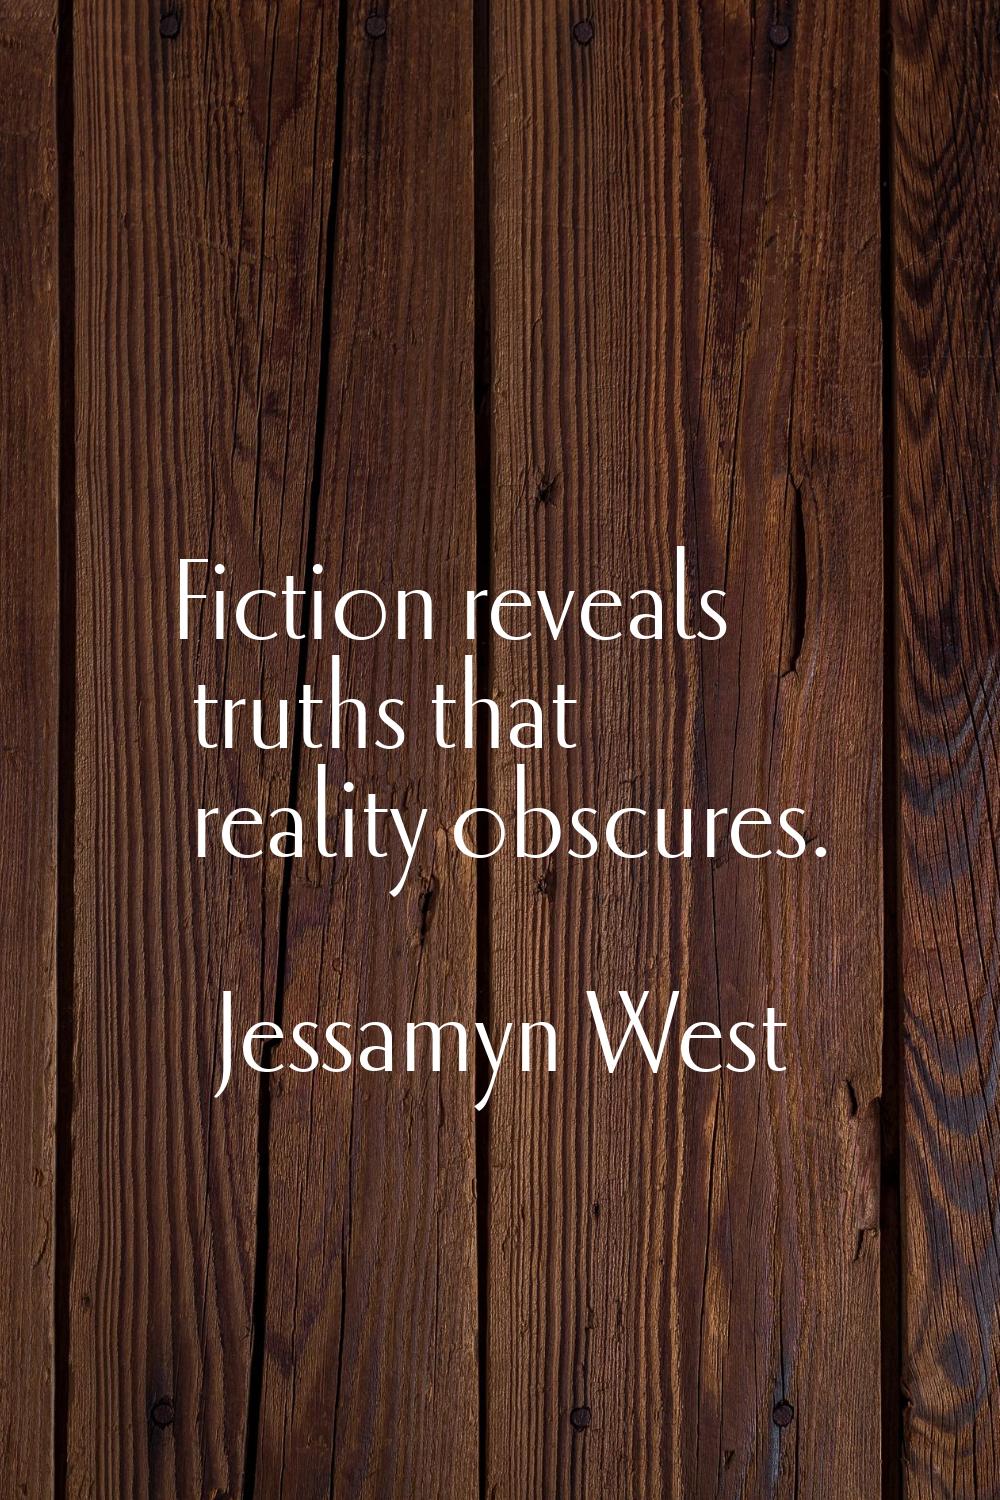 Fiction reveals truths that reality obscures.